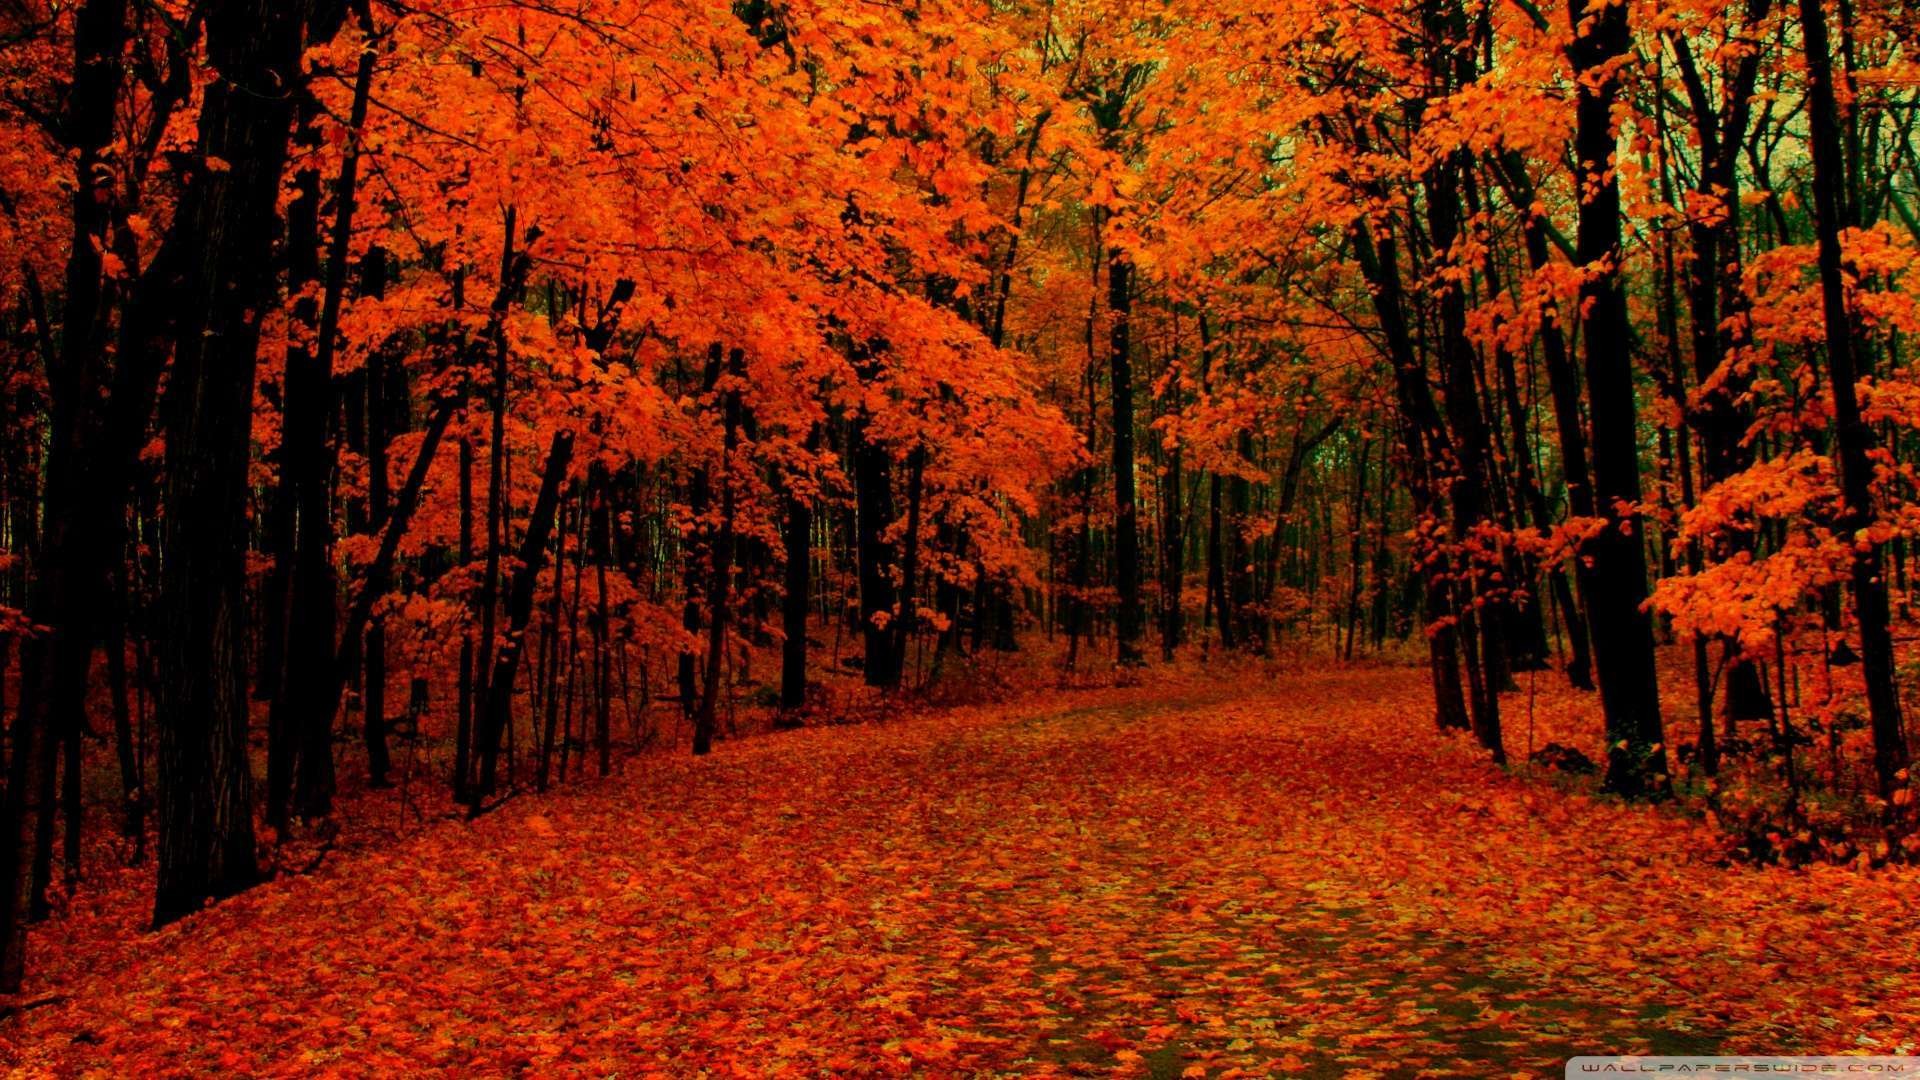 Wallpaper: Fall Path Wallpaper 1080p HD. Upload at February 2, 2014 by .